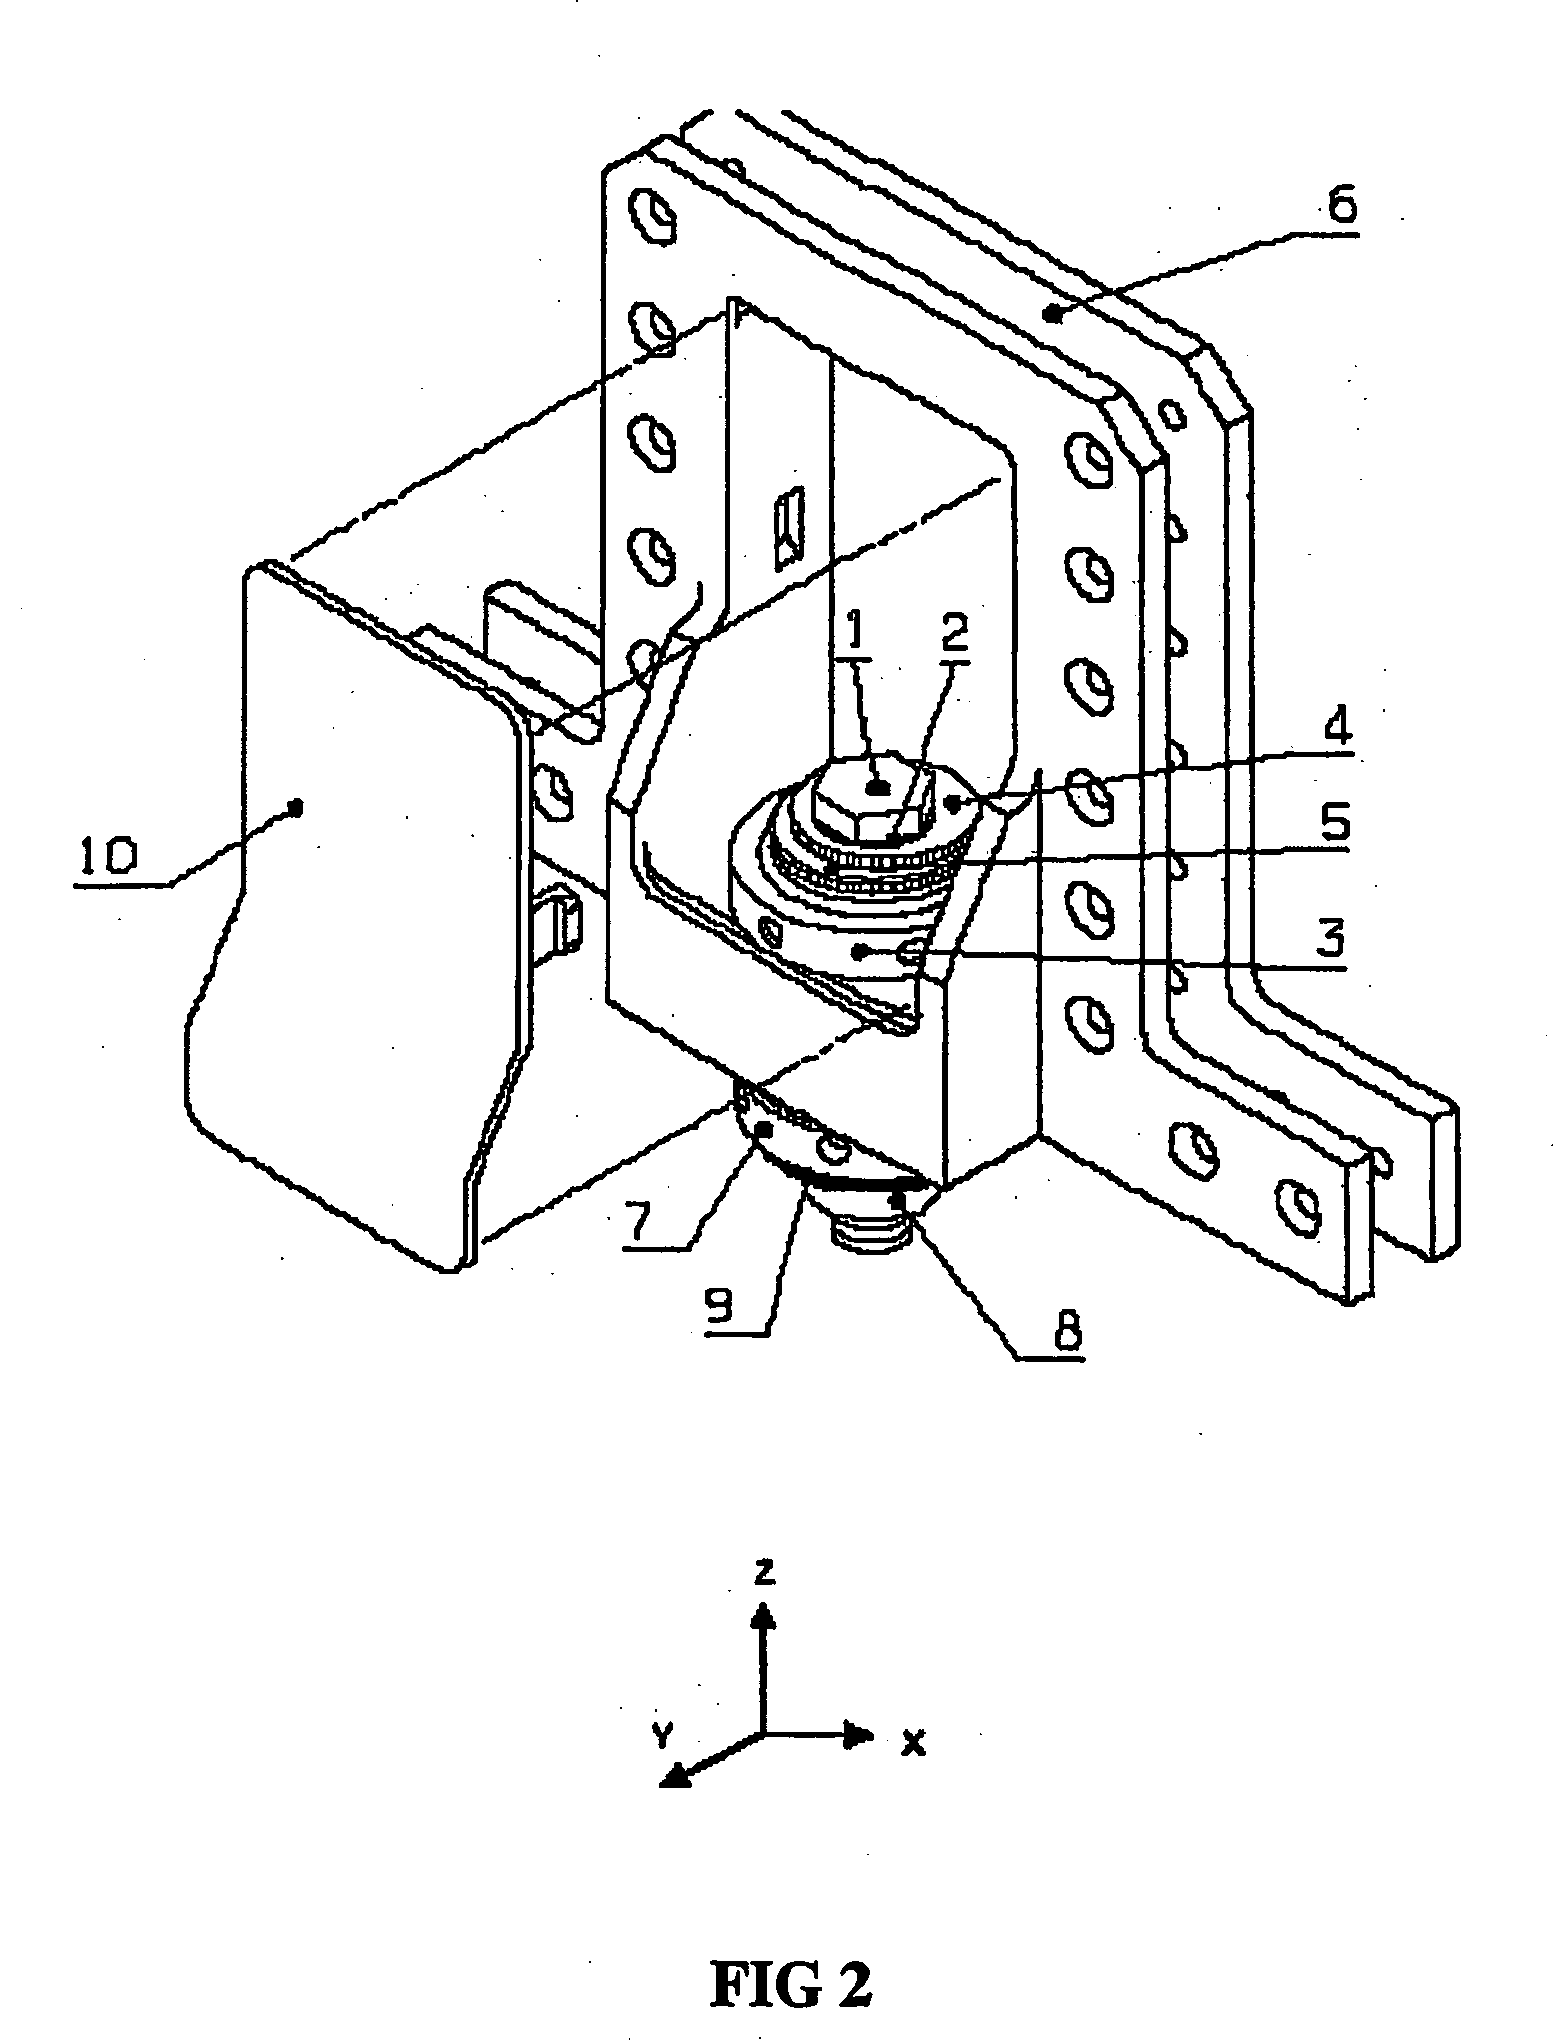 Support device for a galley